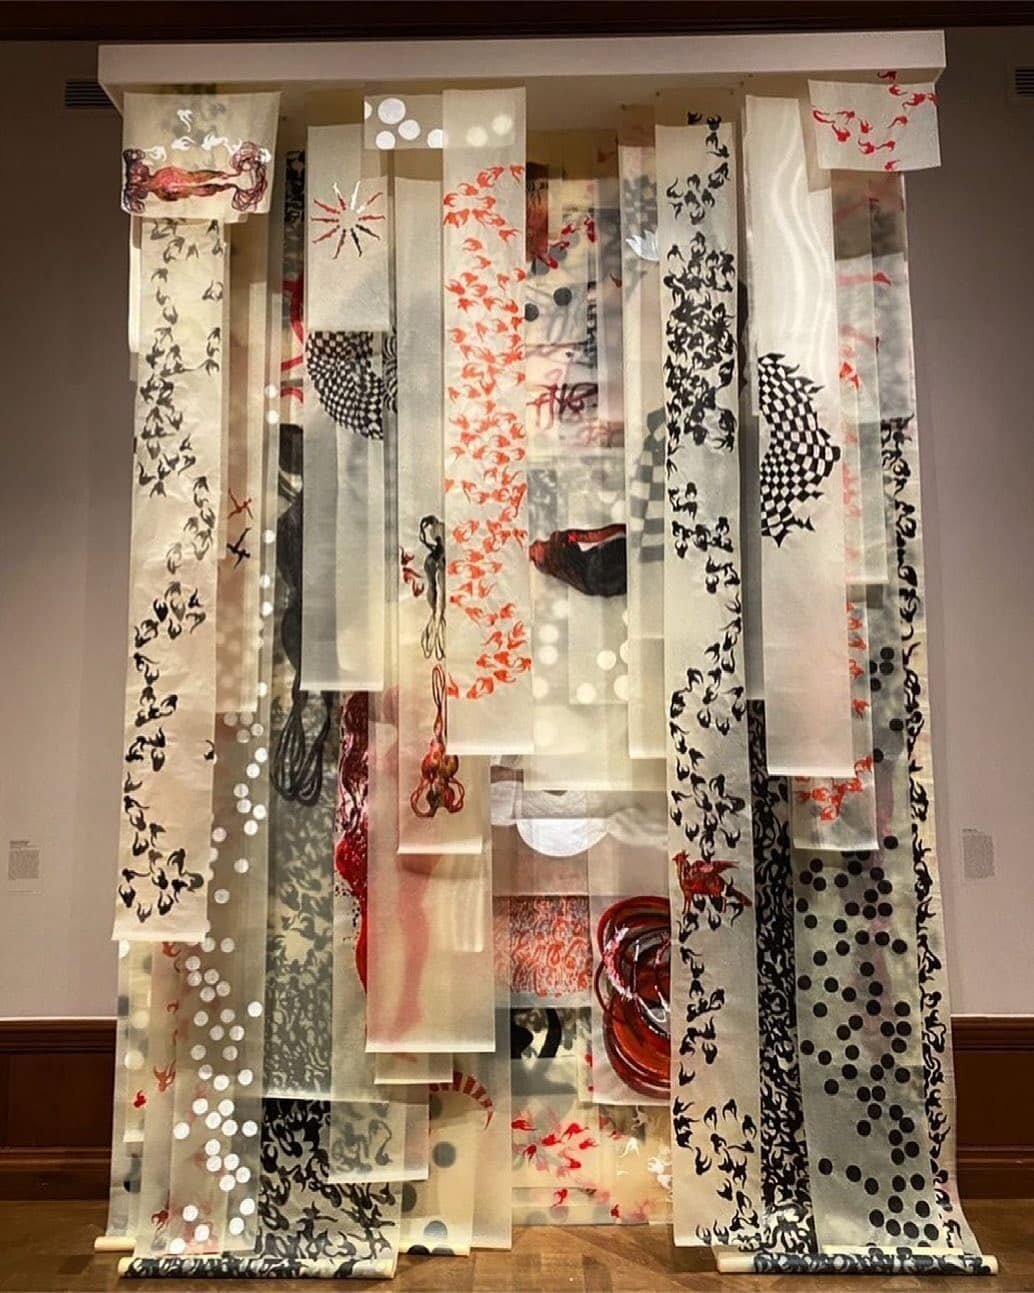 &ldquo;Epistrophe,&rdquo; 2021, by @shahzia.sikander, an installation of layered tracing-paper drawings in her show &ldquo;Extraordinary Realities&rdquo; @themorganlibrary
Reposted from @shahzia.sikander  @rcembalest
&quot;Born and raised in Pakistan